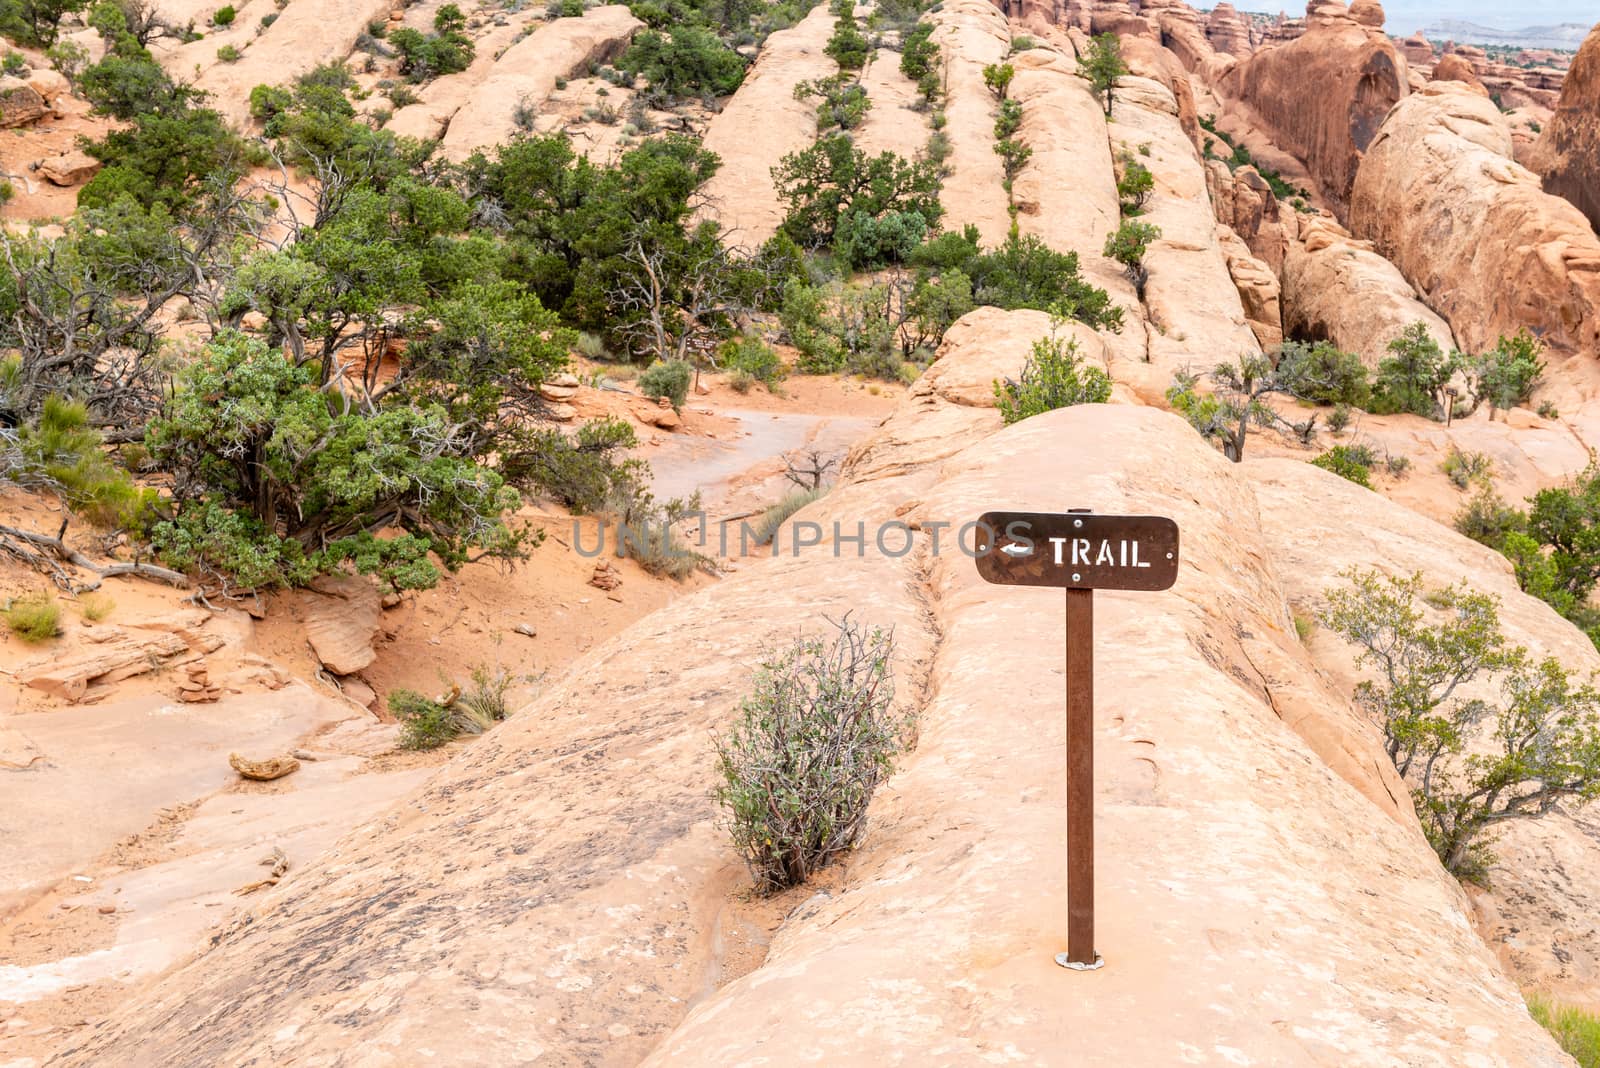 Trail sign on Devils Garden Trail in Arches National Park, Utah by Njean